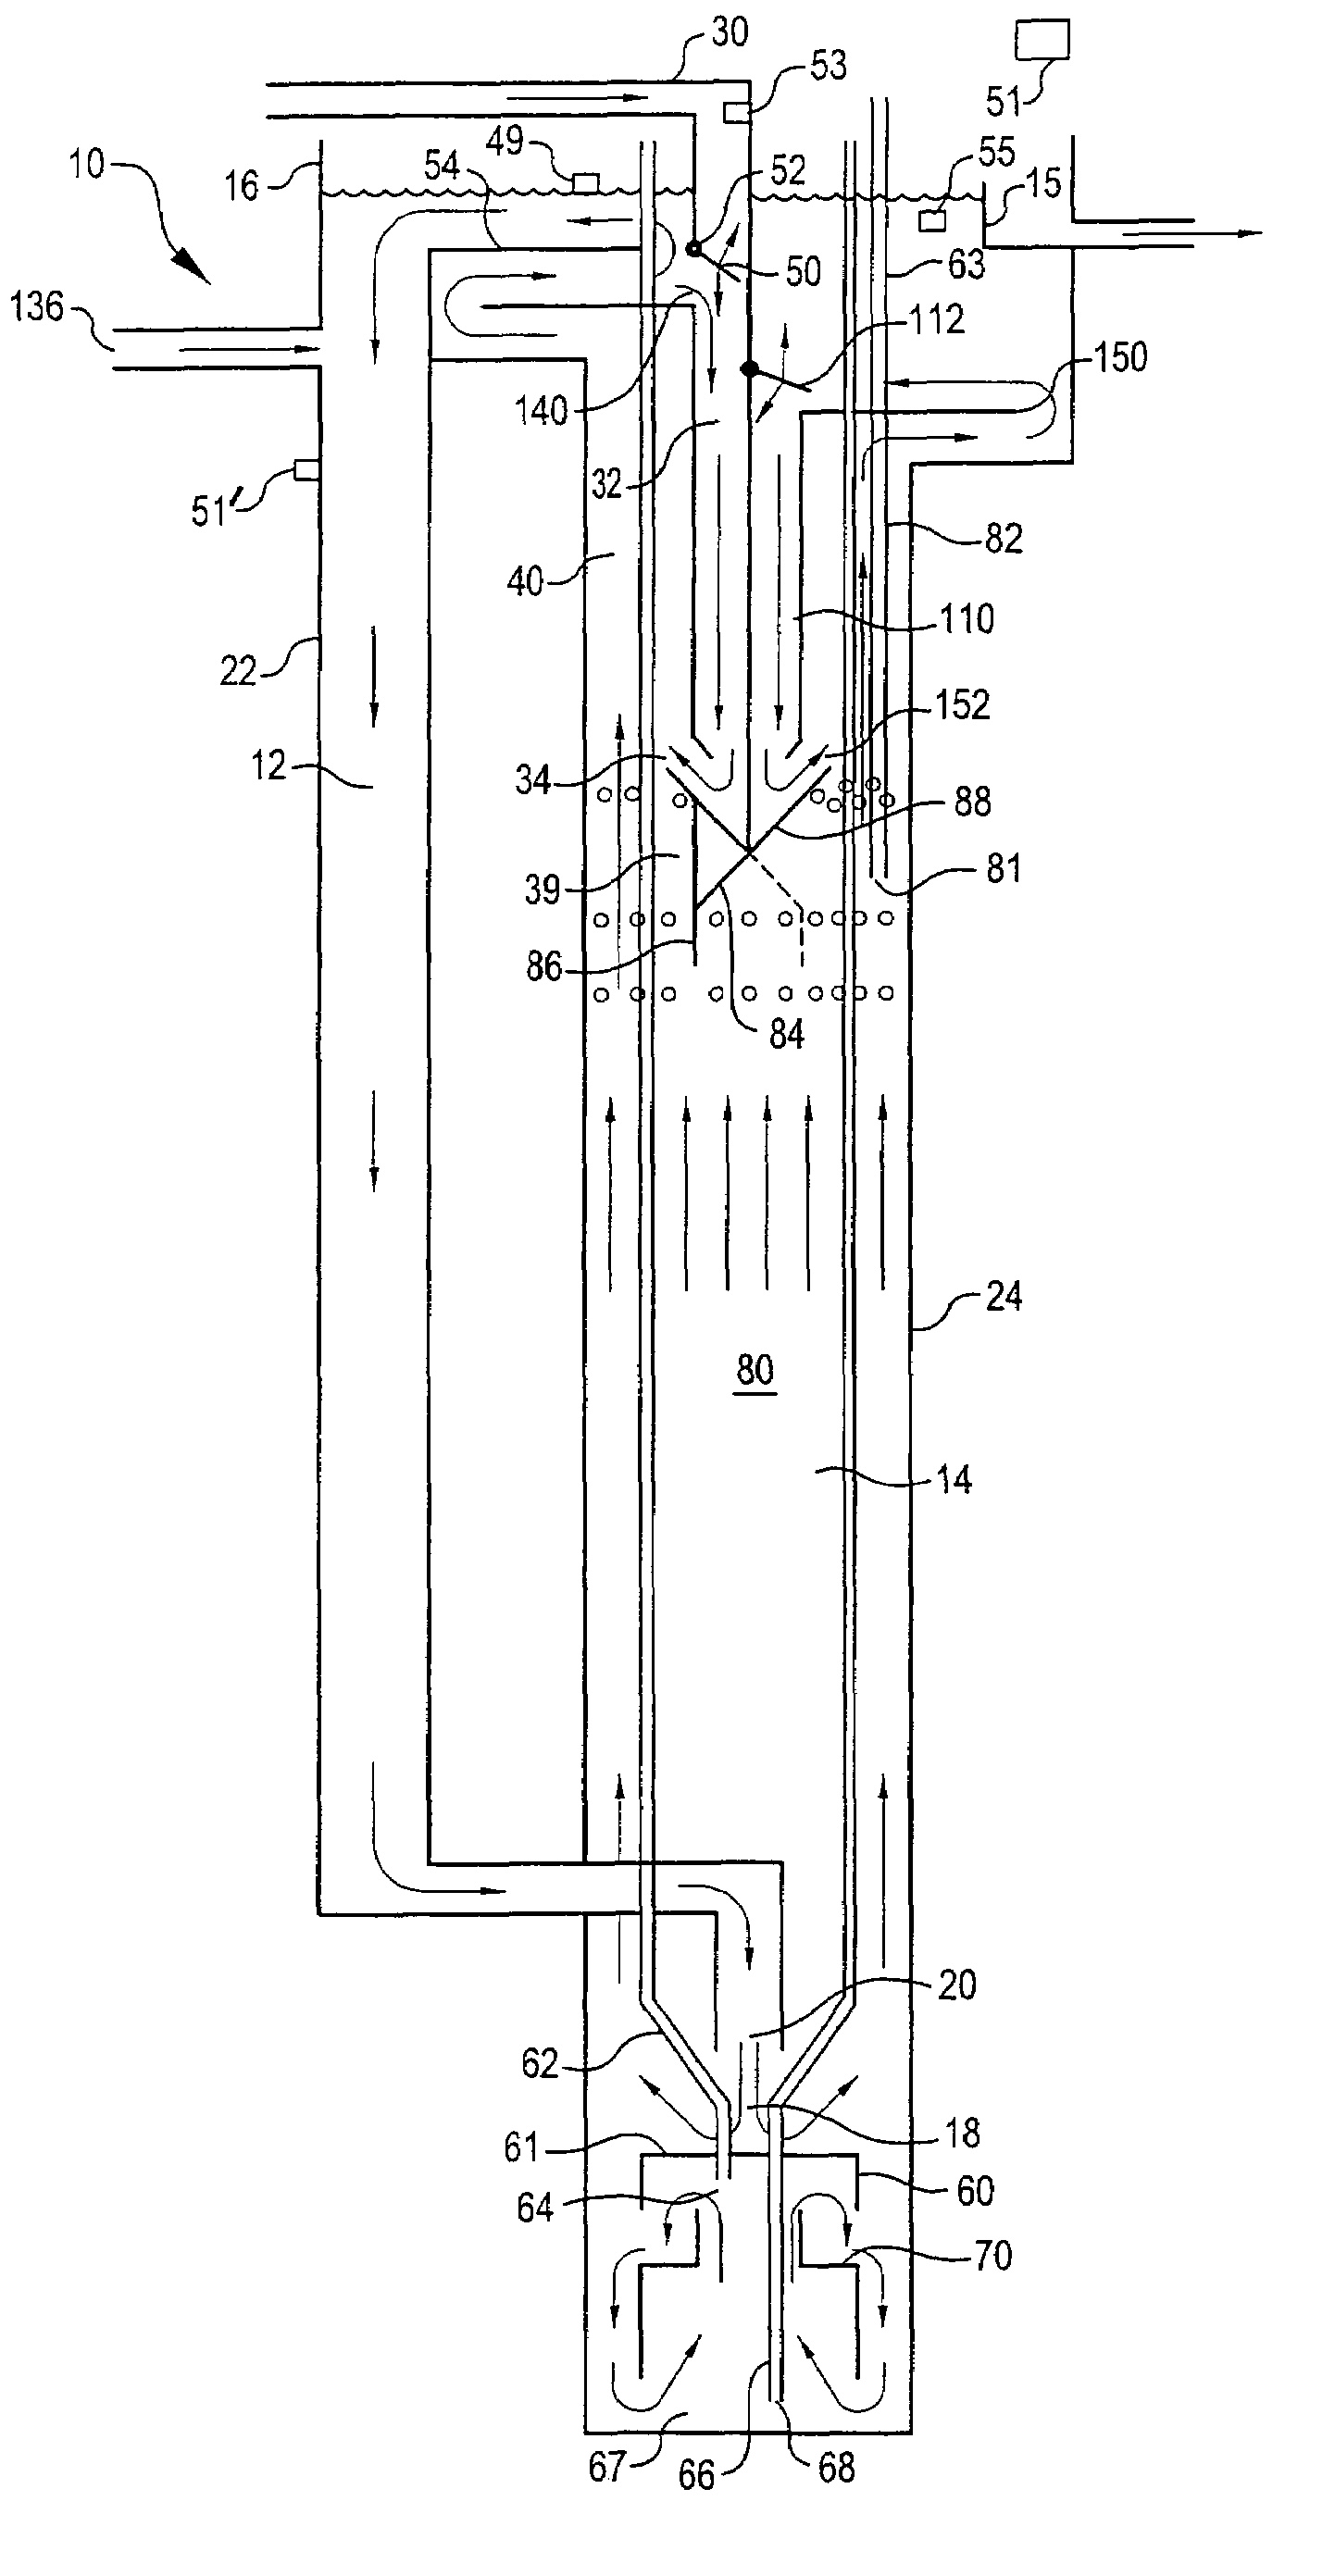 Apparatus for biological treatment of waste waters